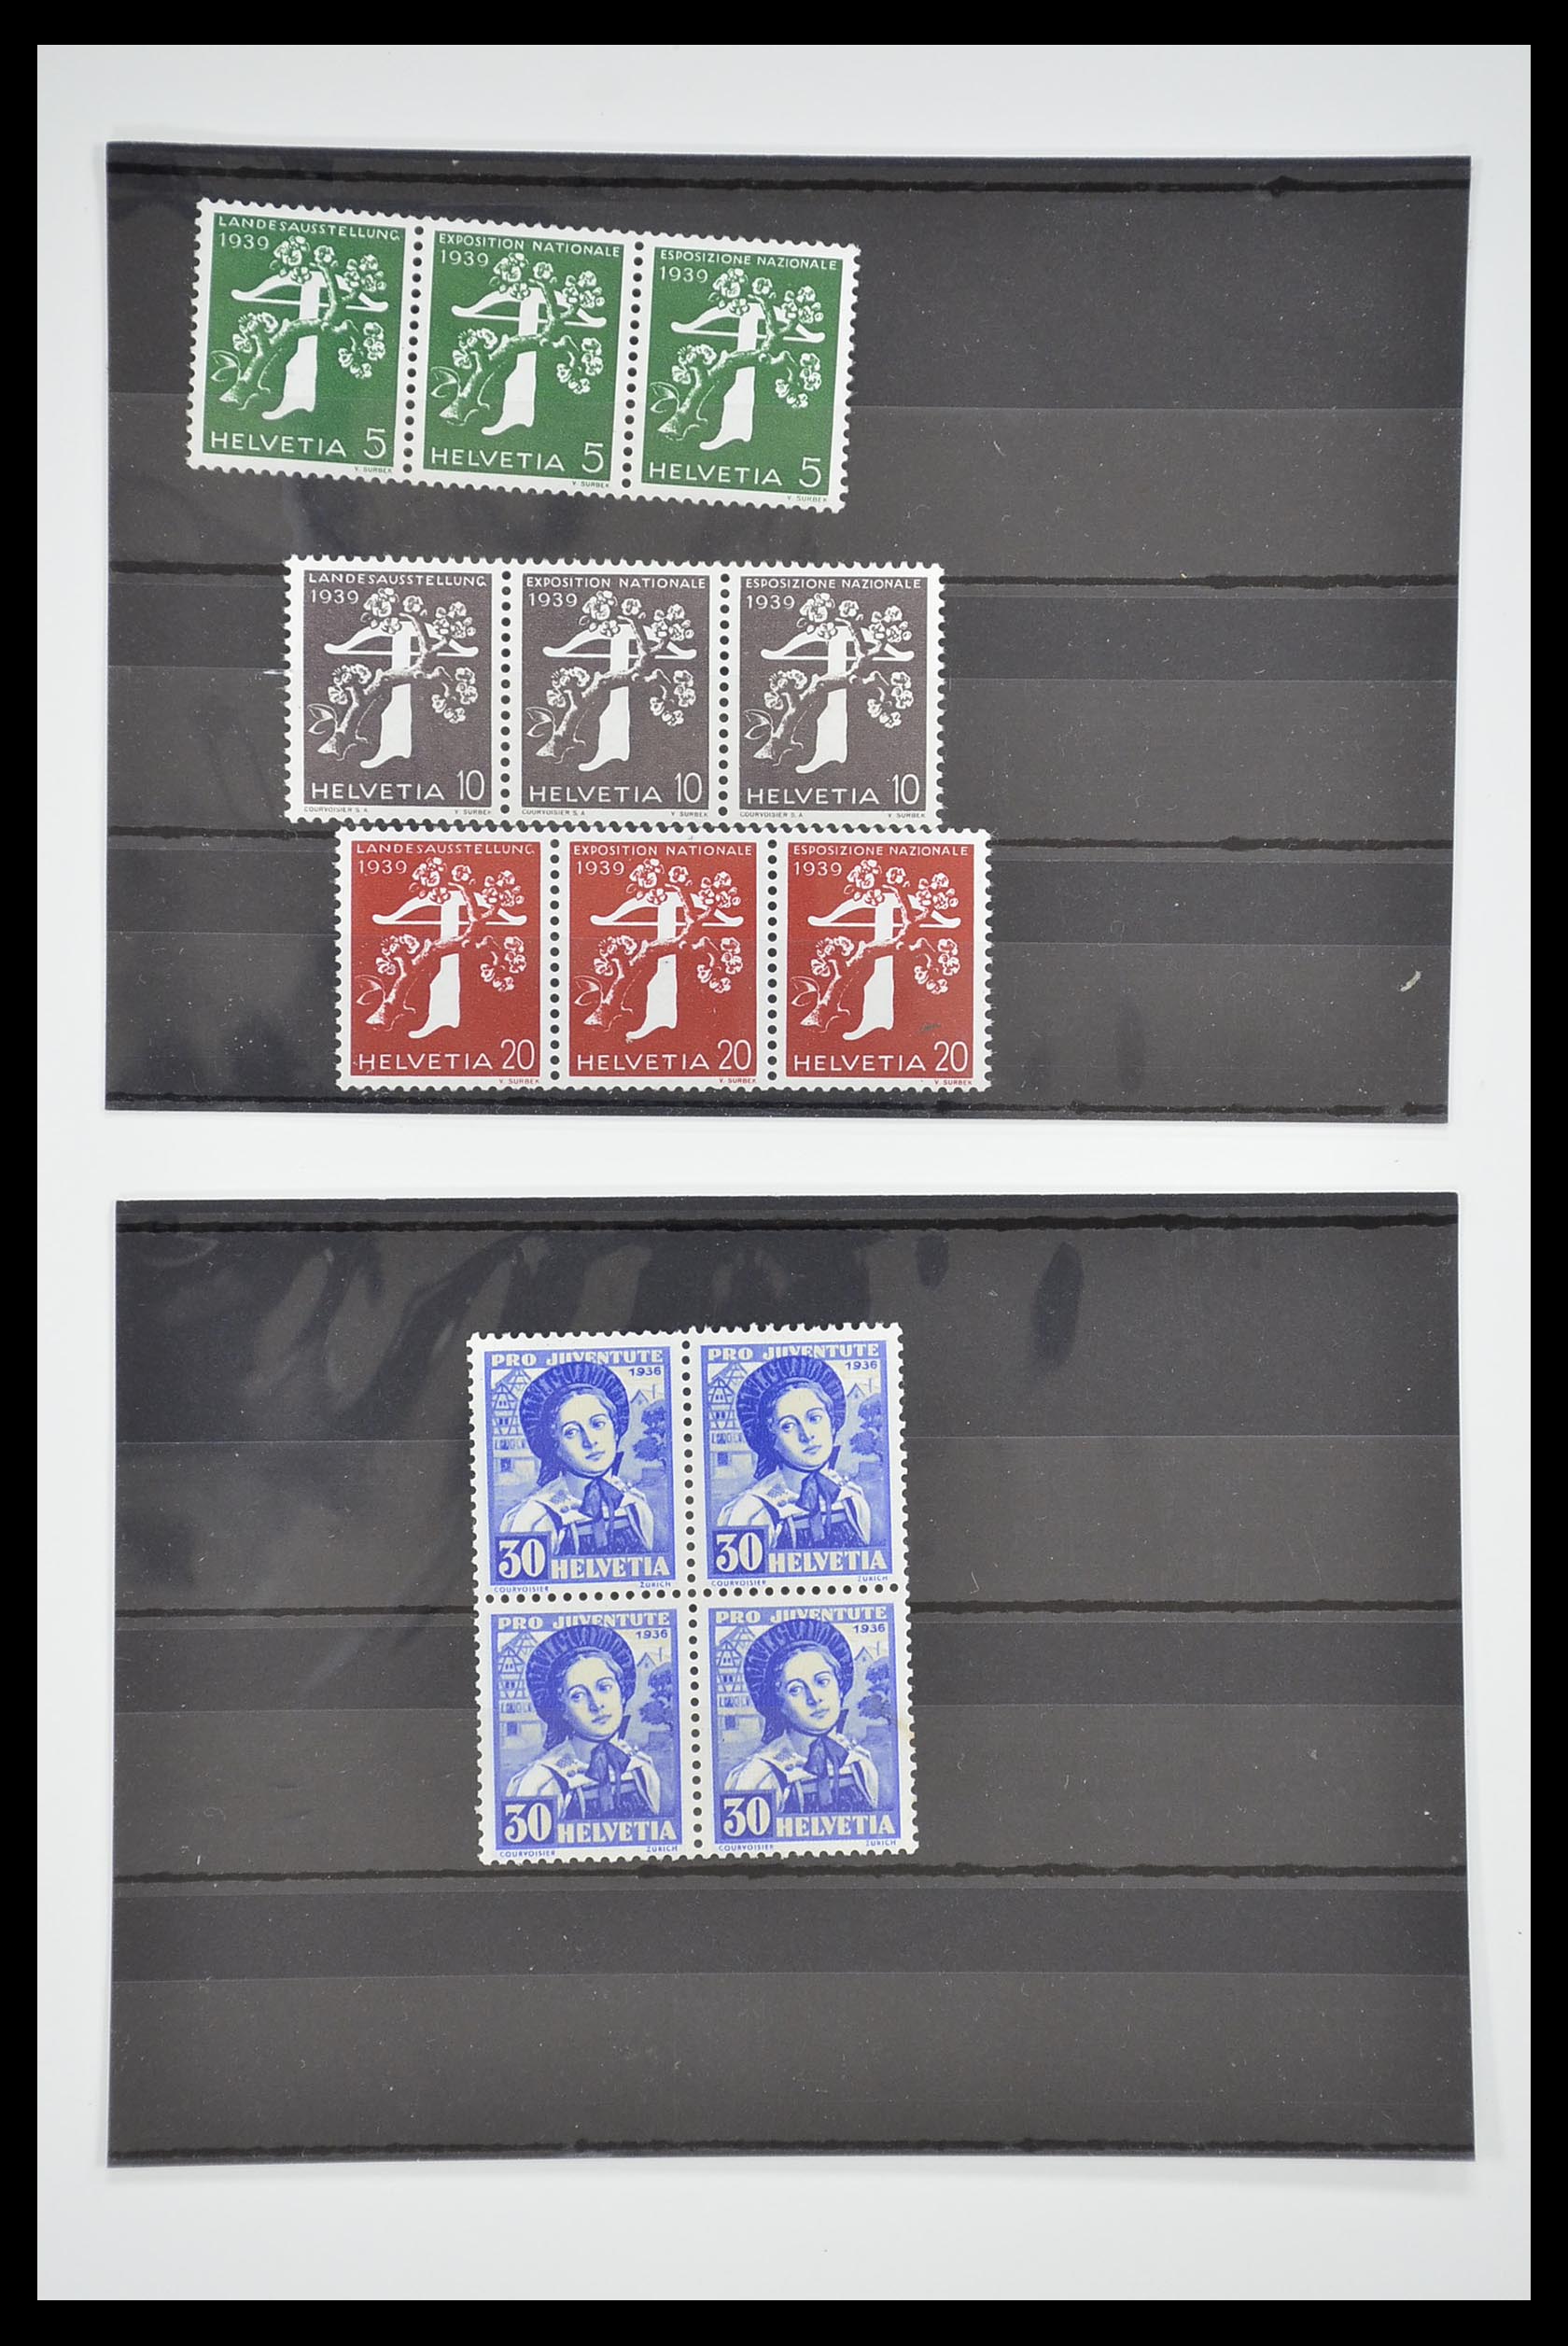 33284 019 - Stamp collection 33284 Switzerland better issues 1900-1995.